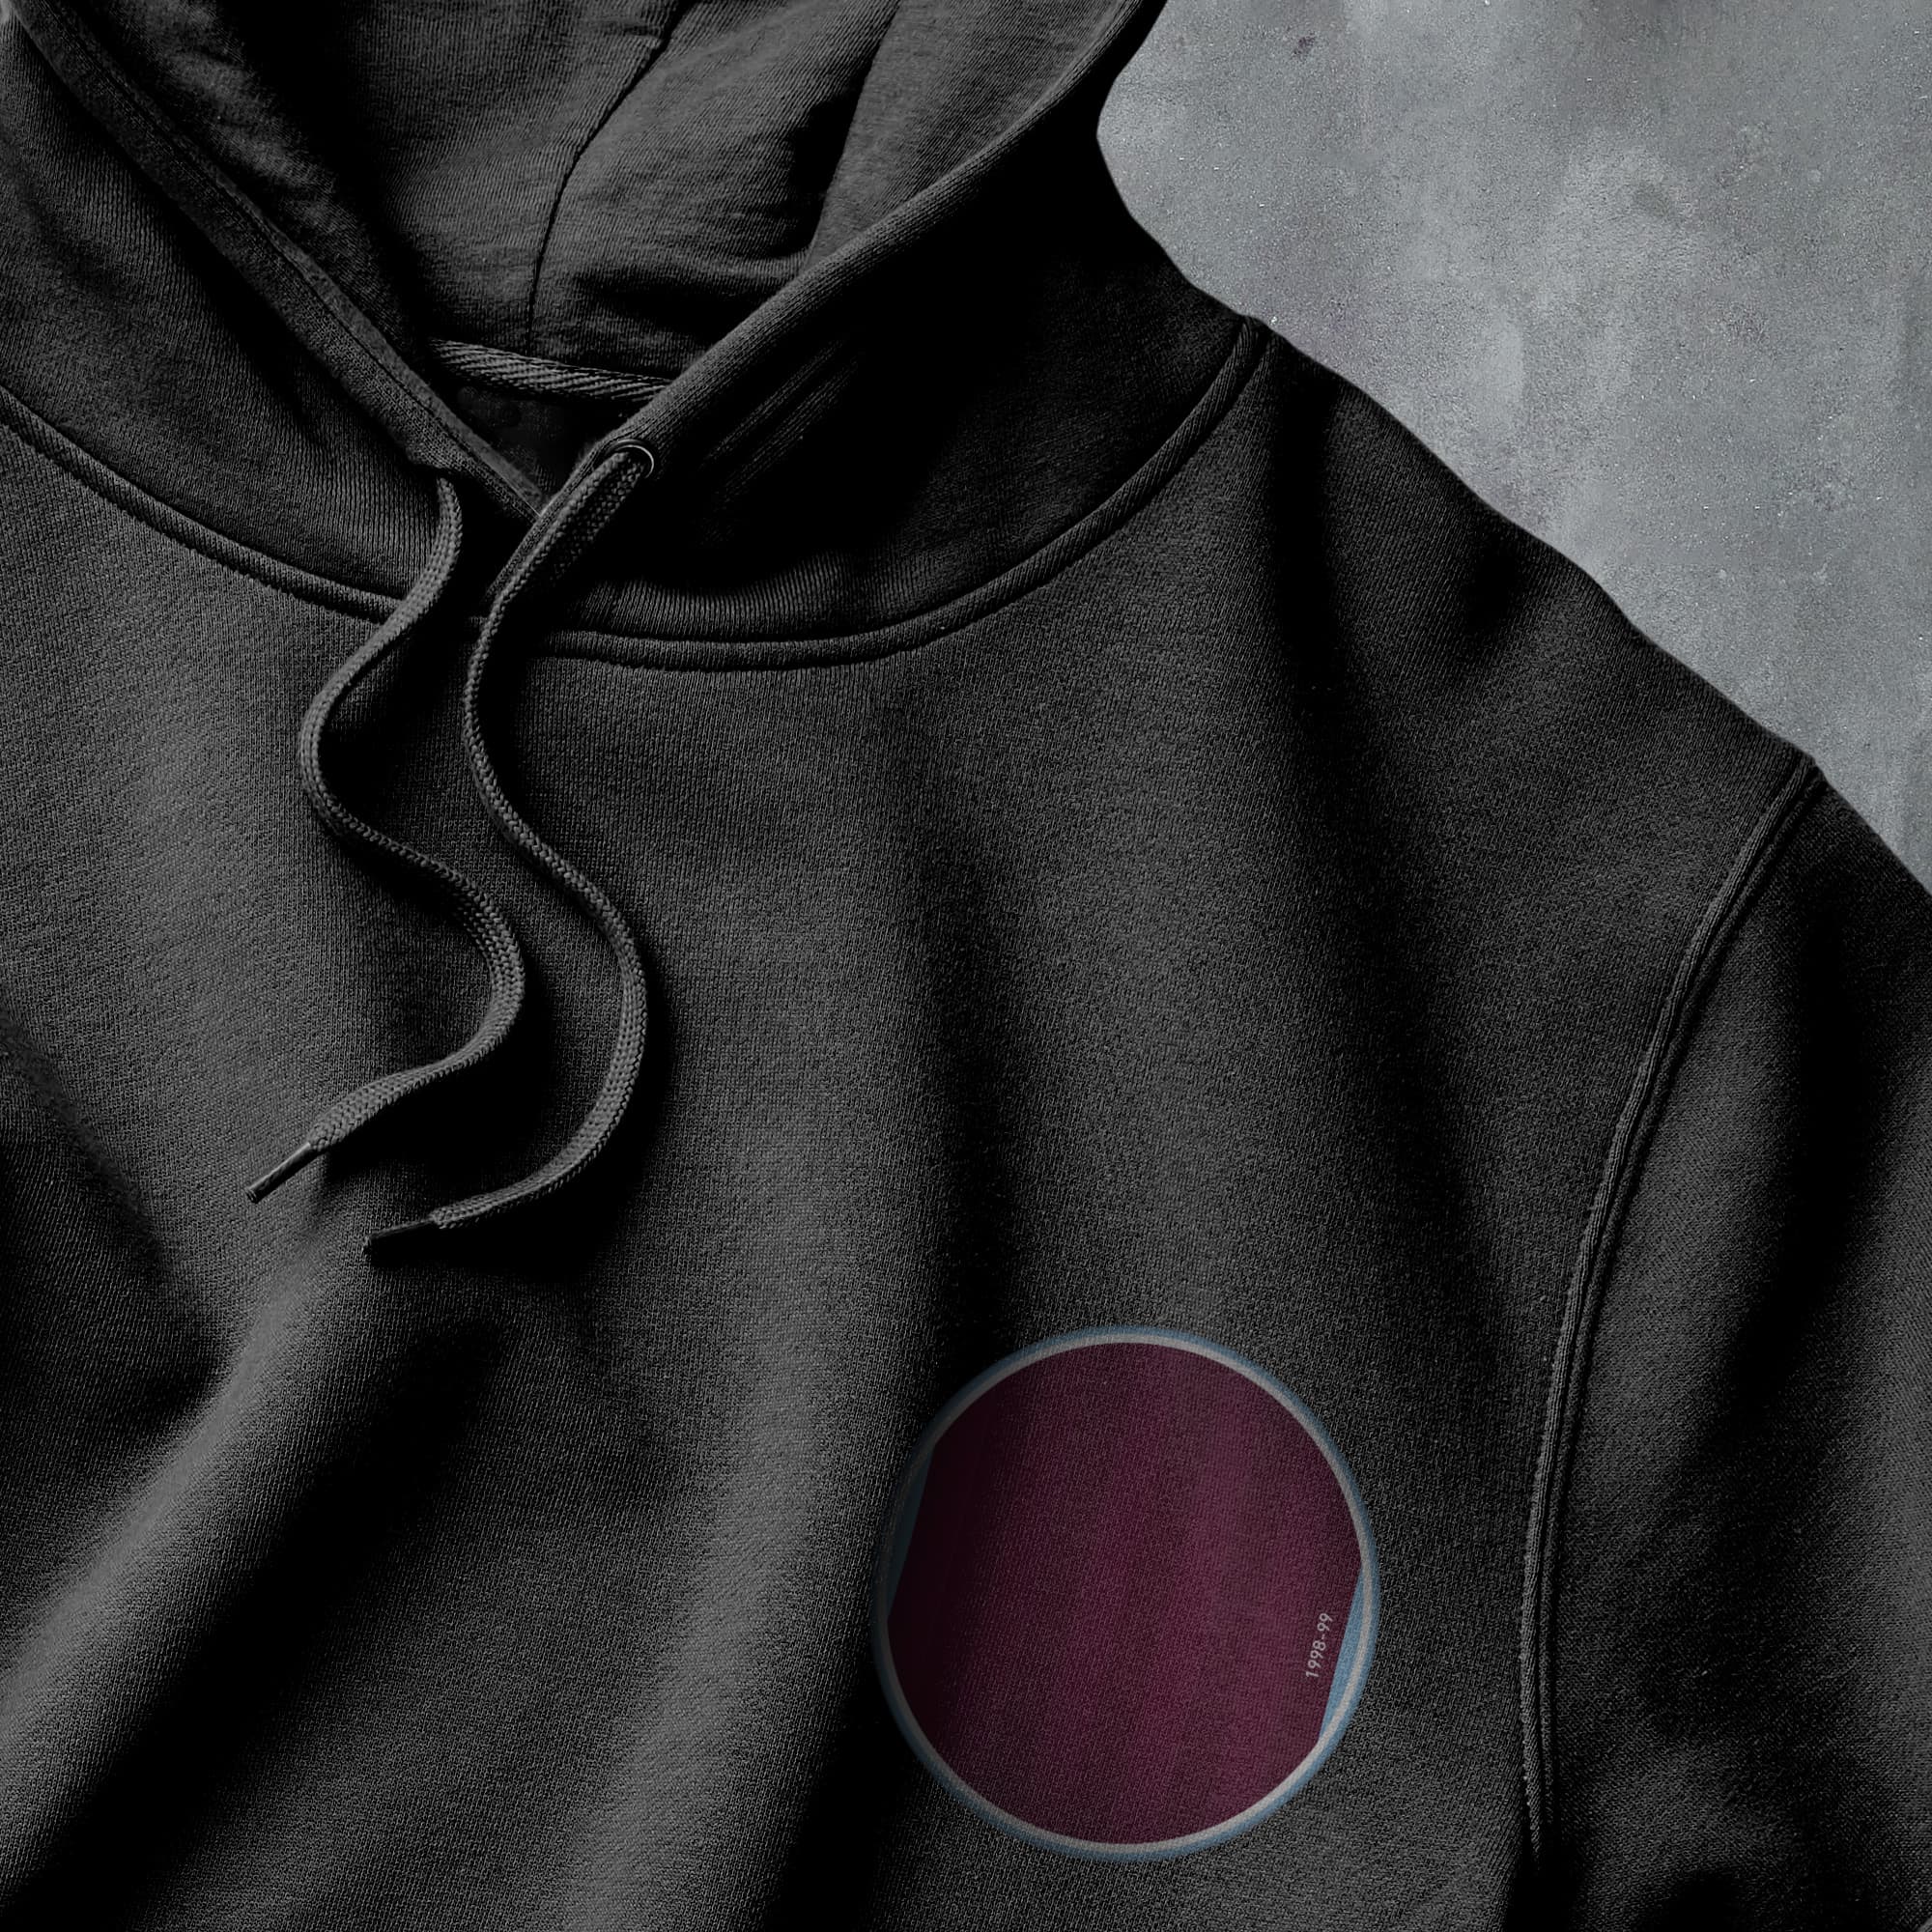 a black hoodie with a red circle on it